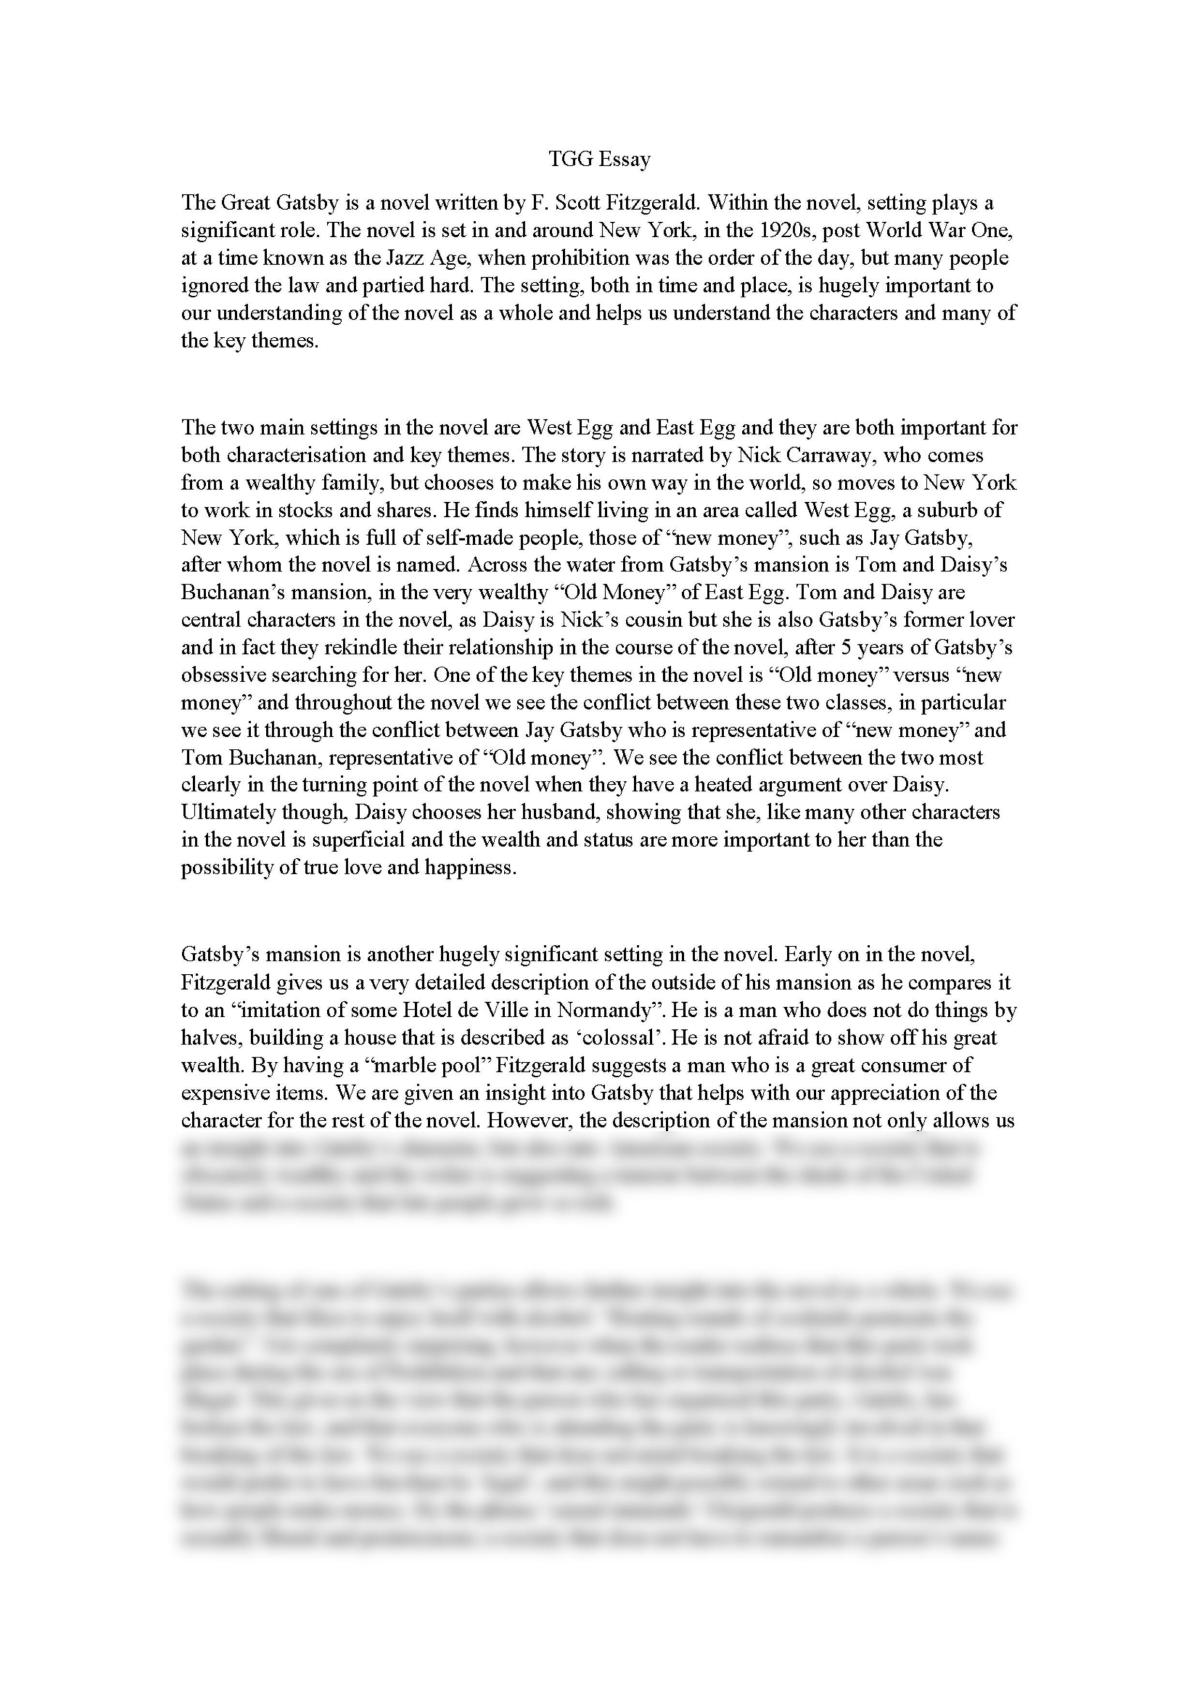 thesis for great gatsby essay